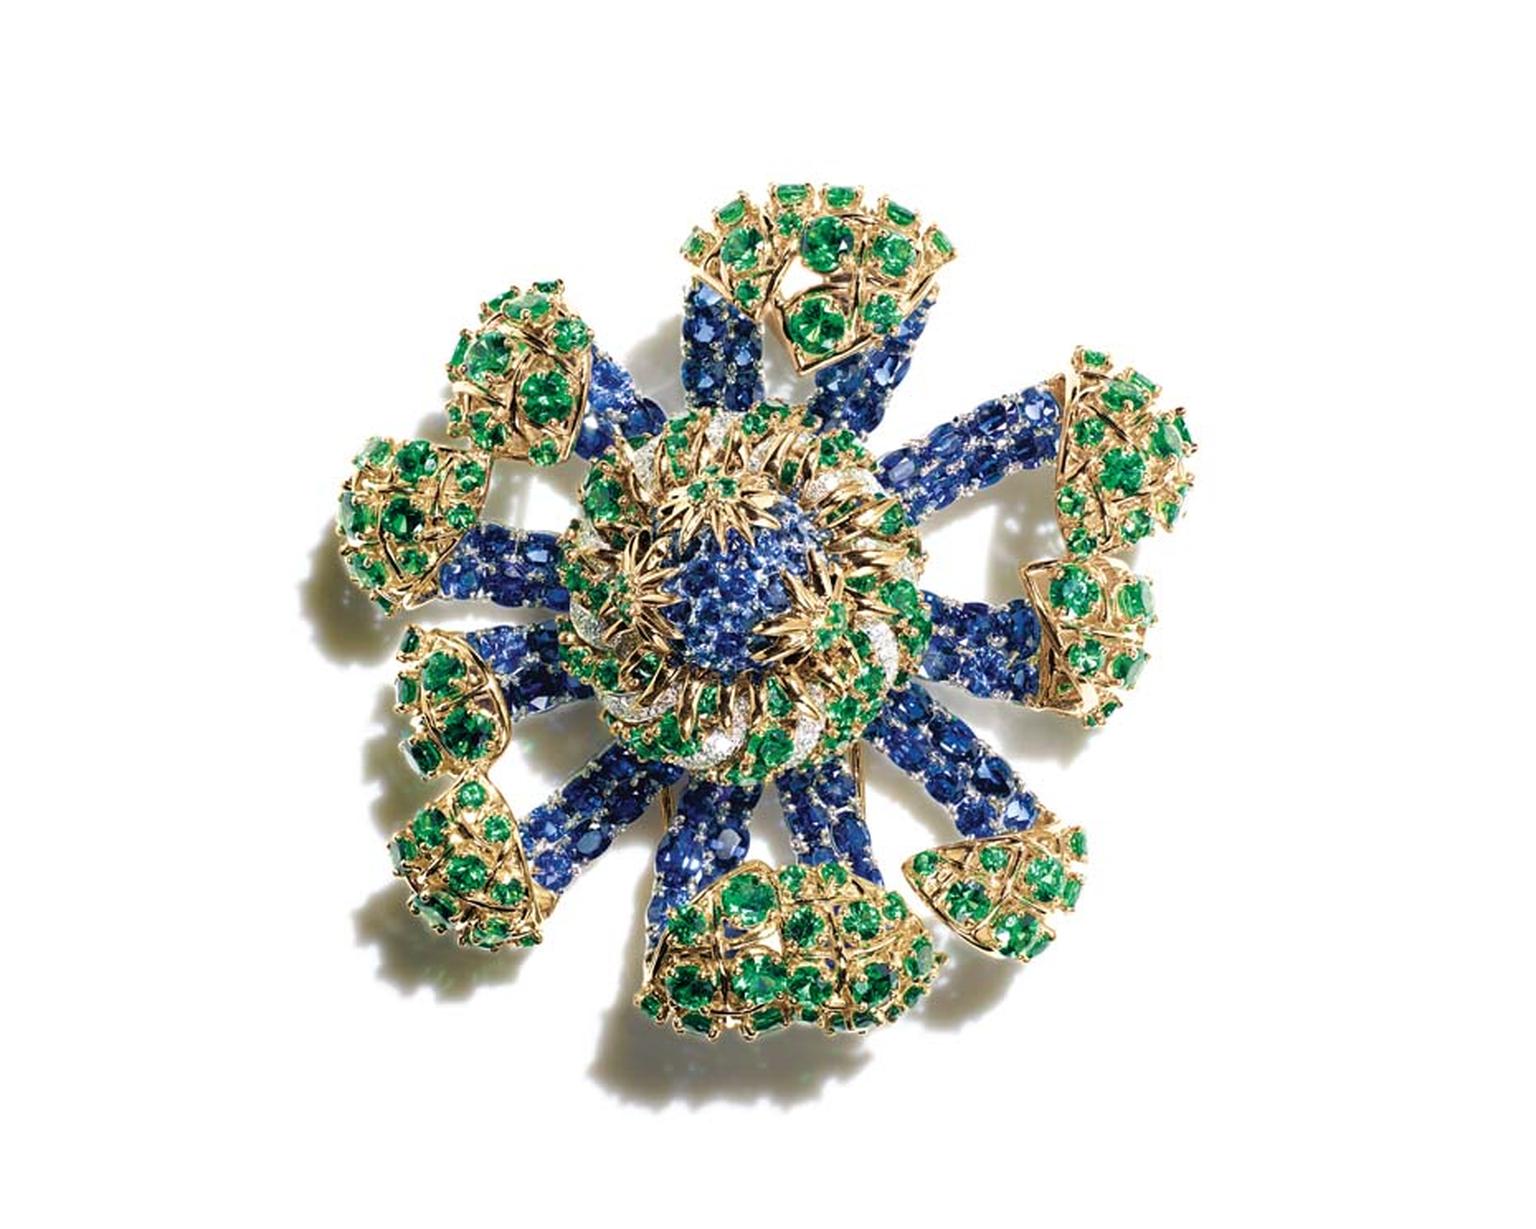 Jean Schlumberger for Tiffany sea anemone clip with sapphires, tsavorites and diamonds in gold and platinum, from the new Blue Book collection.